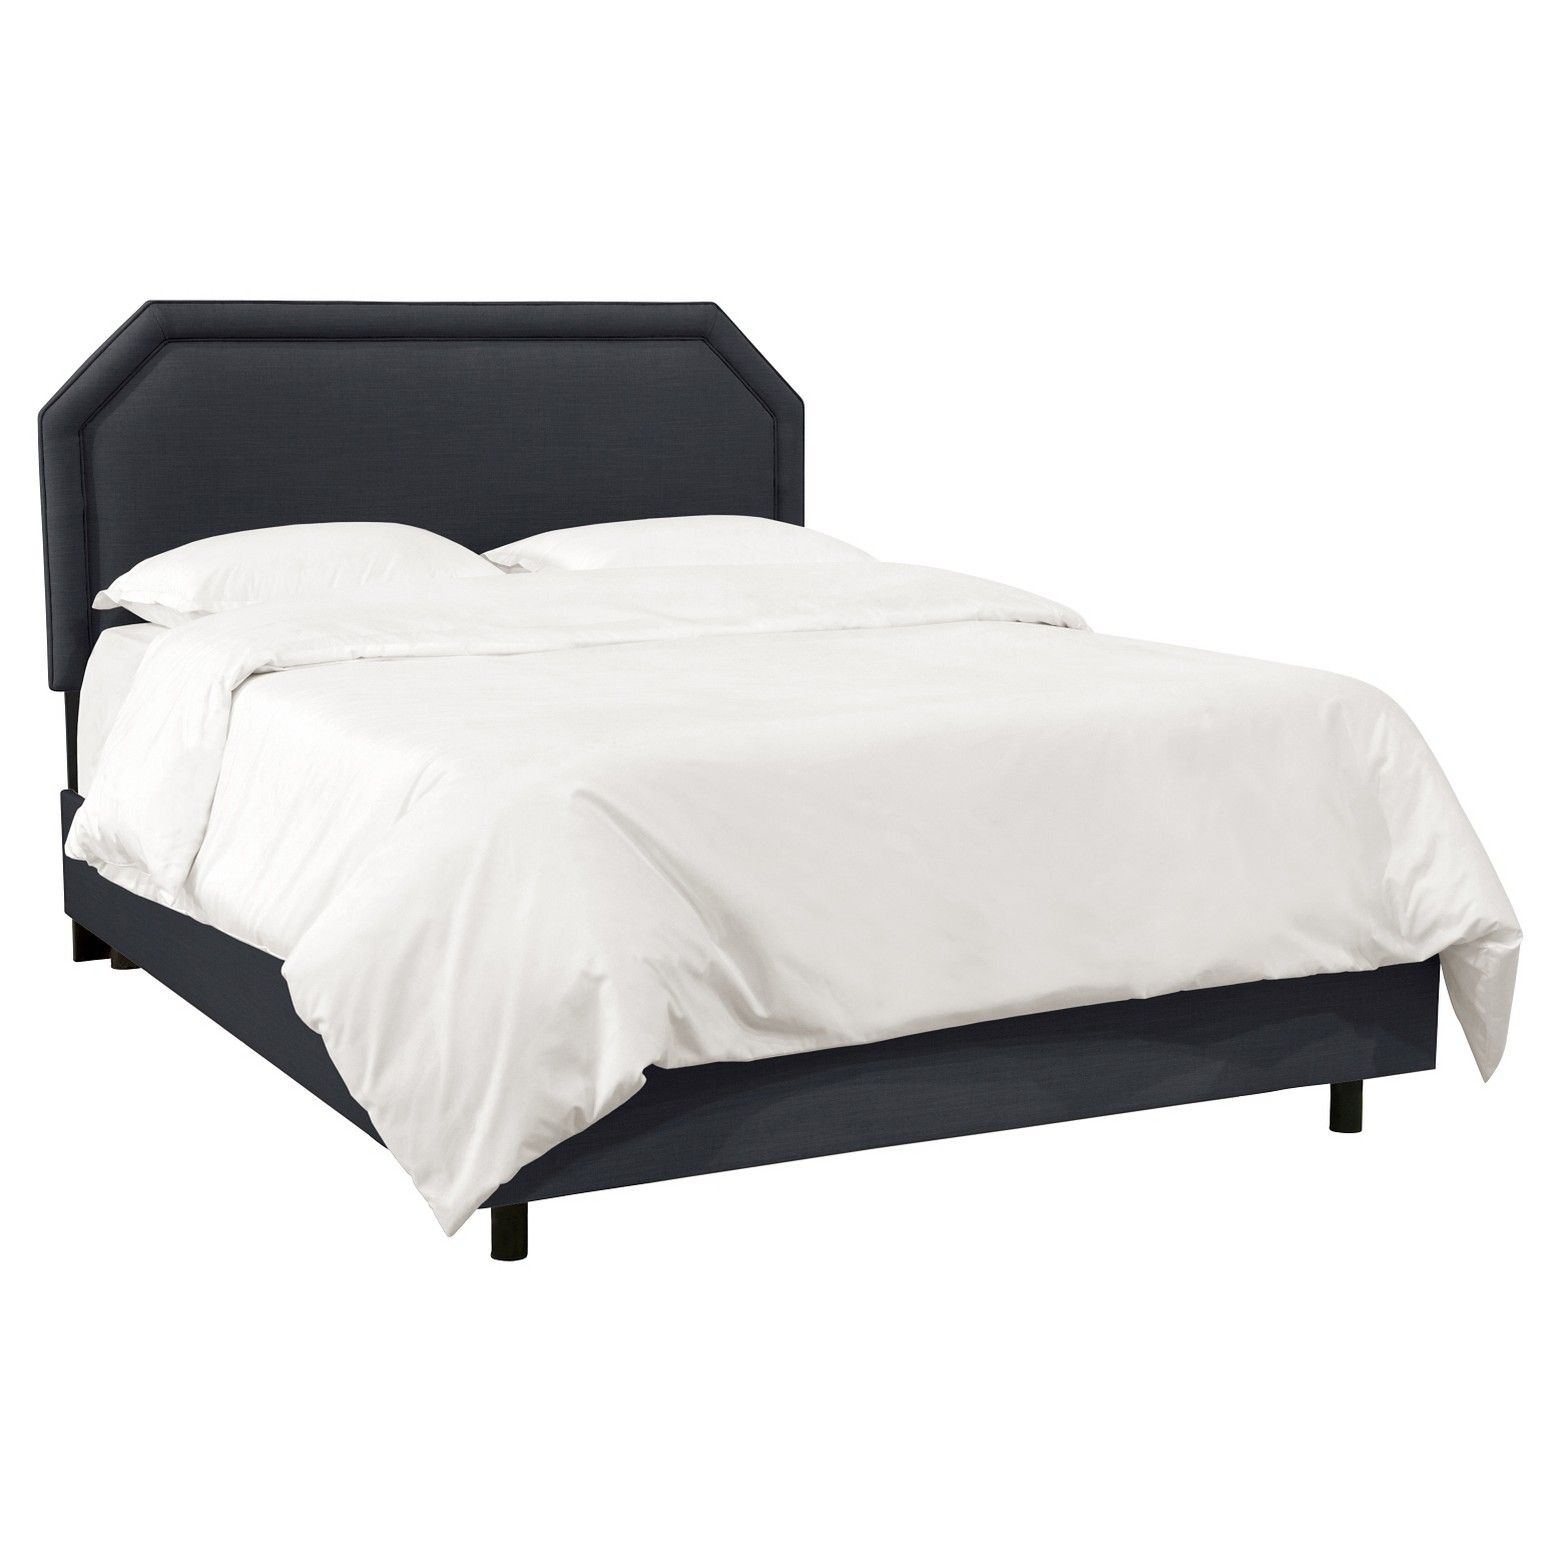 nate berkus gem cut spot cleaner and mattress cast metal accent table complete your perfect bedroom with this brilliantly designed handcrafted upholstered ikea storage cupboards